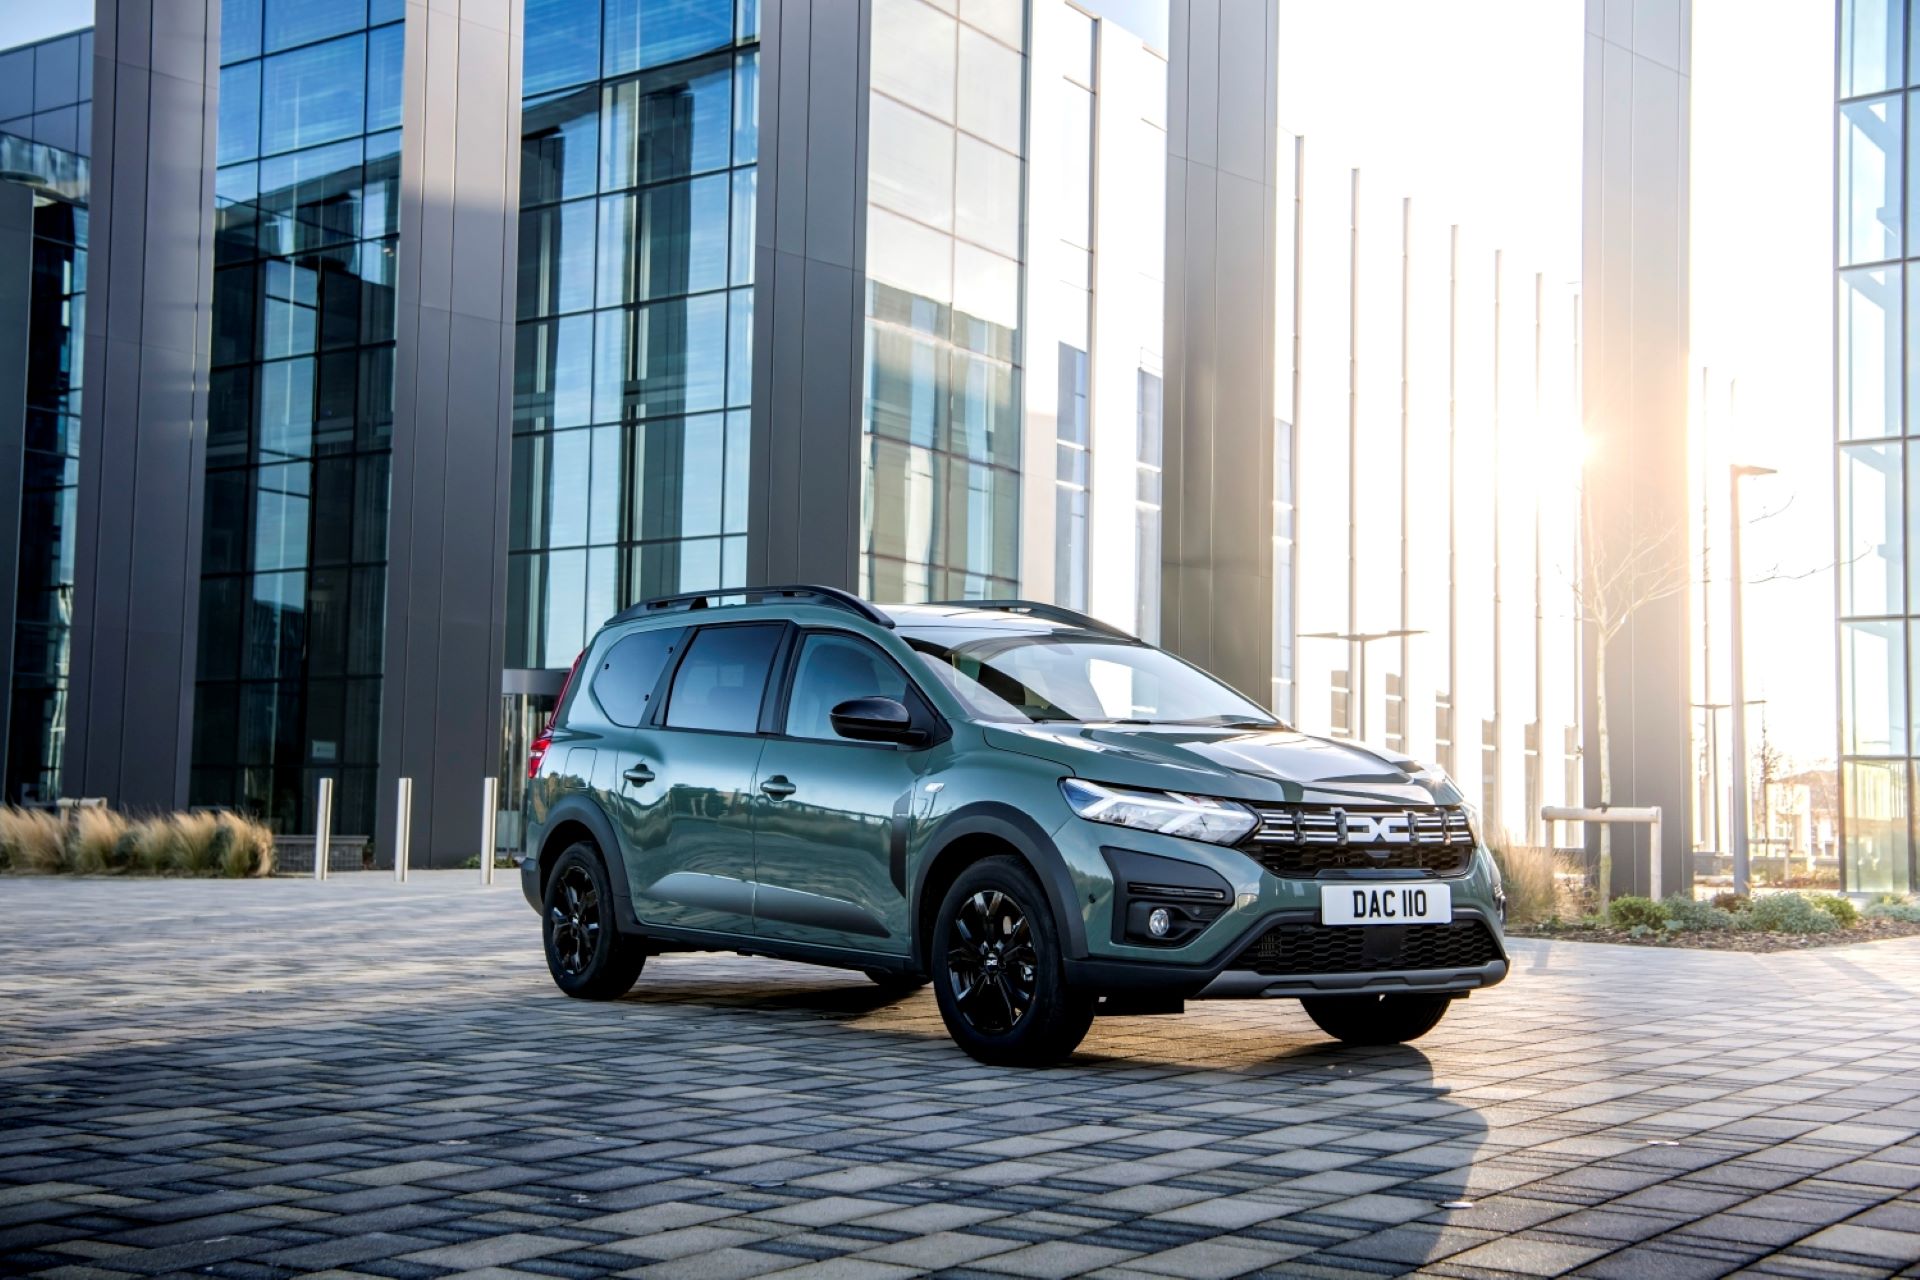 Dacia Jogger wins ‘Best Value Car’ for the second year running